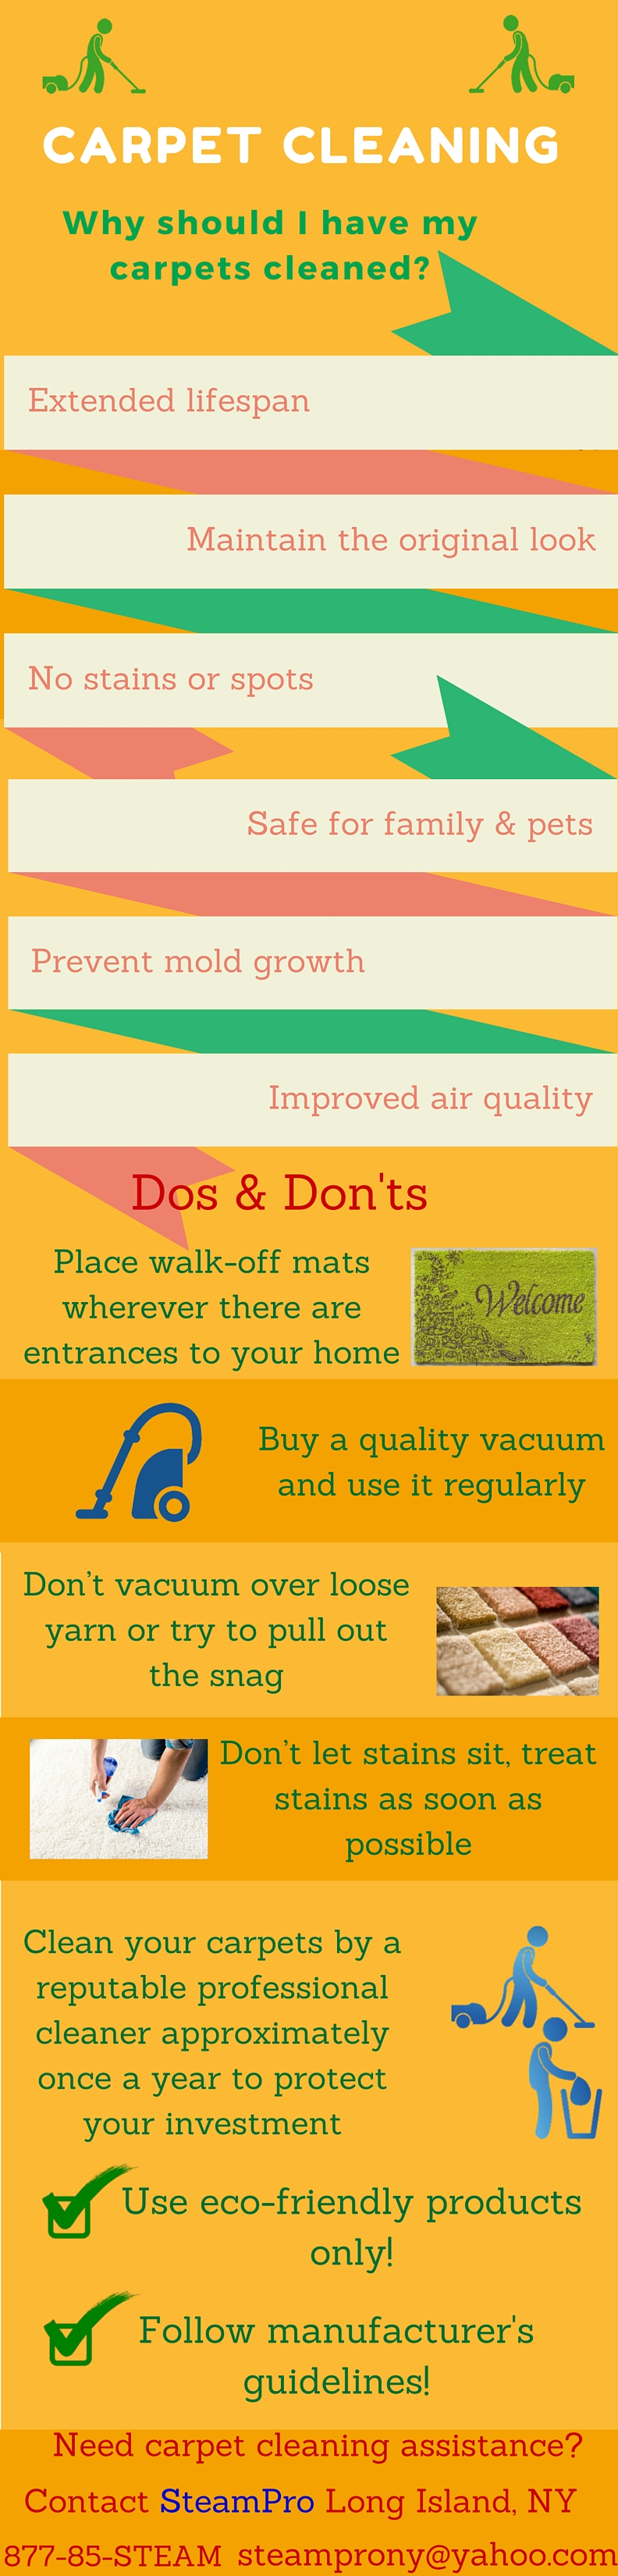 Carpet Cleaning Tips | Visual.ly